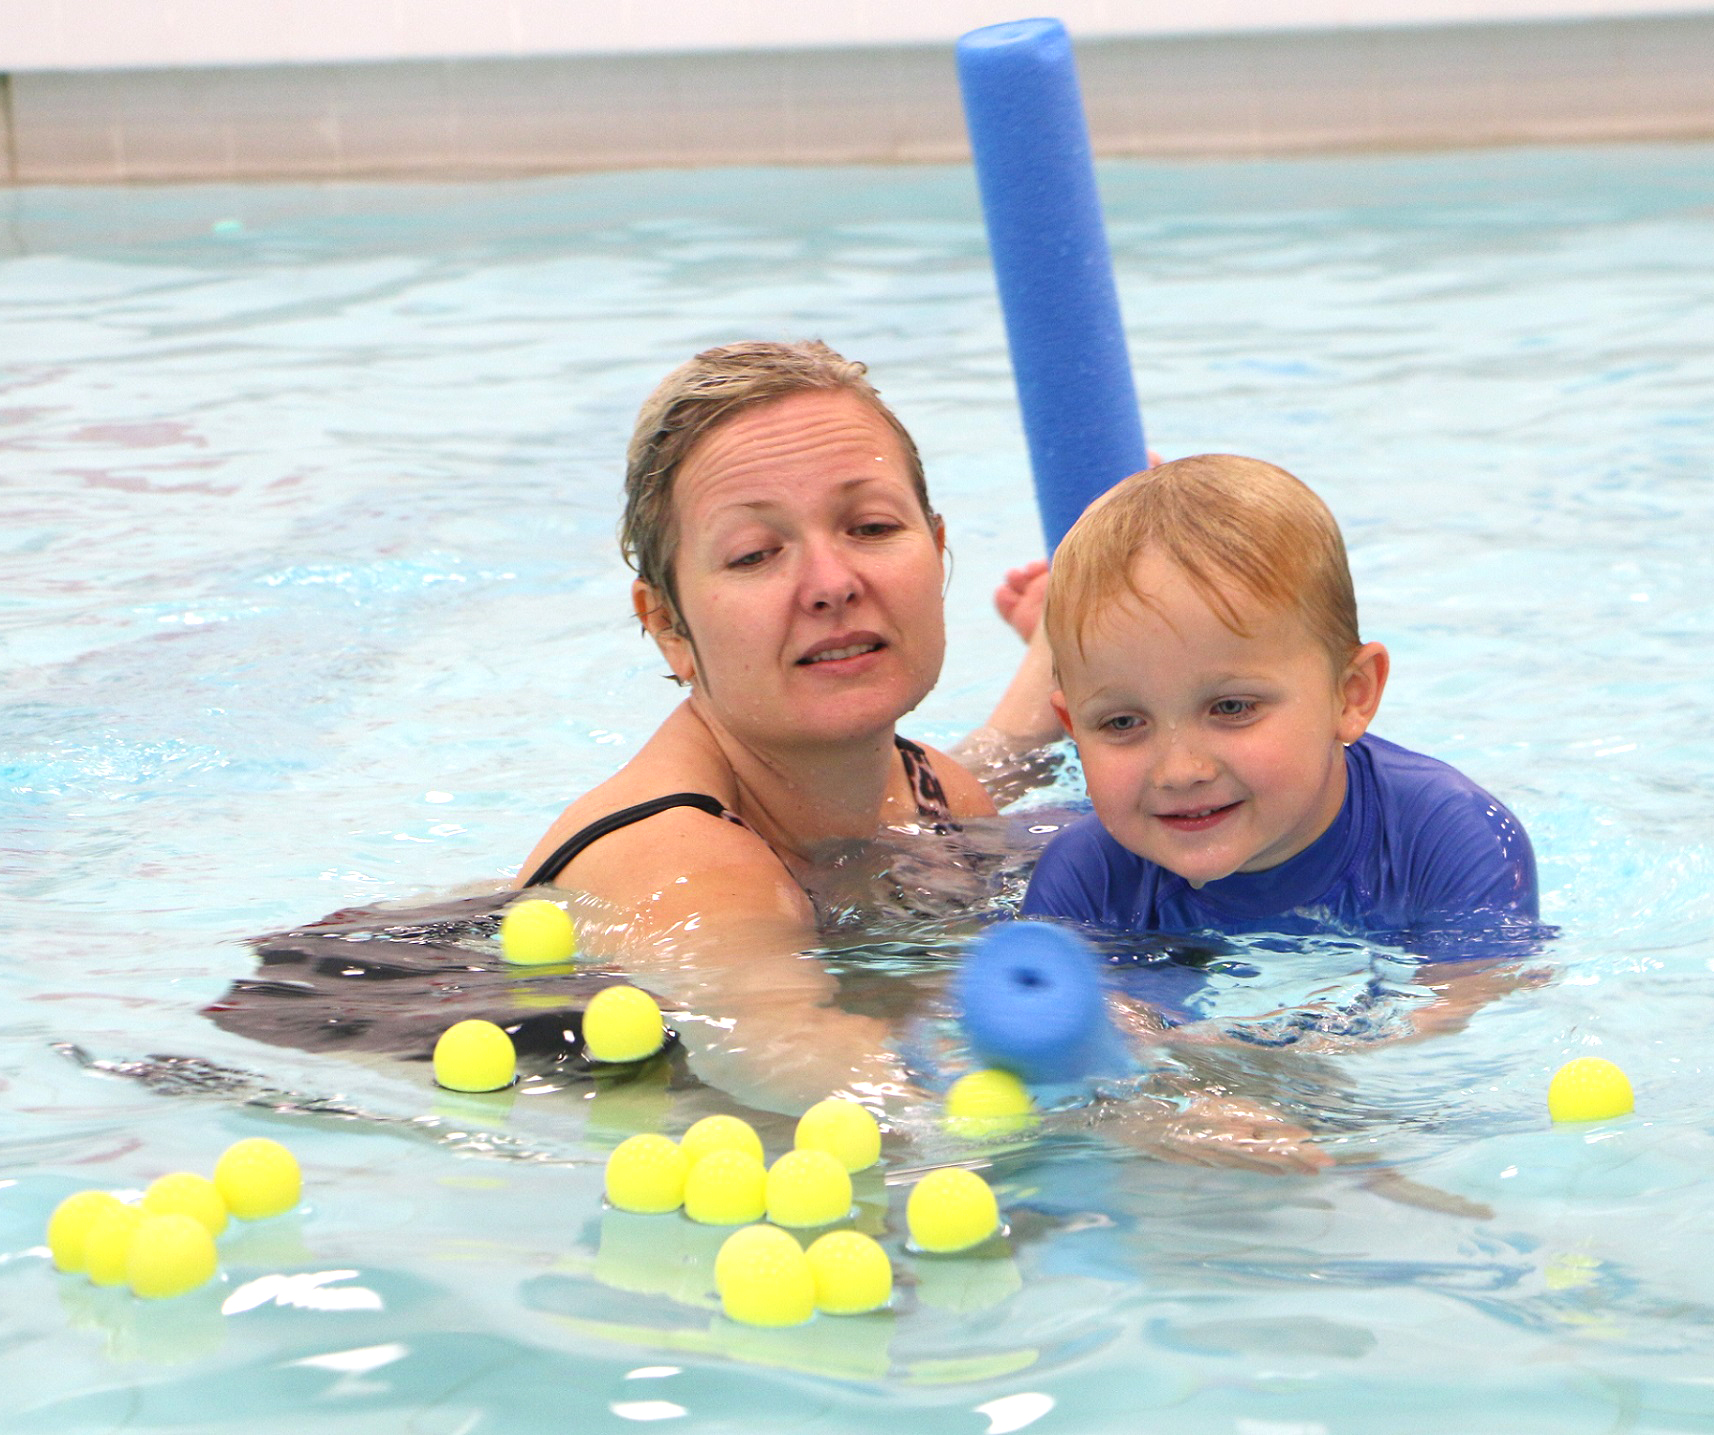 Make a Splash This Summer at Fun Family Sessions